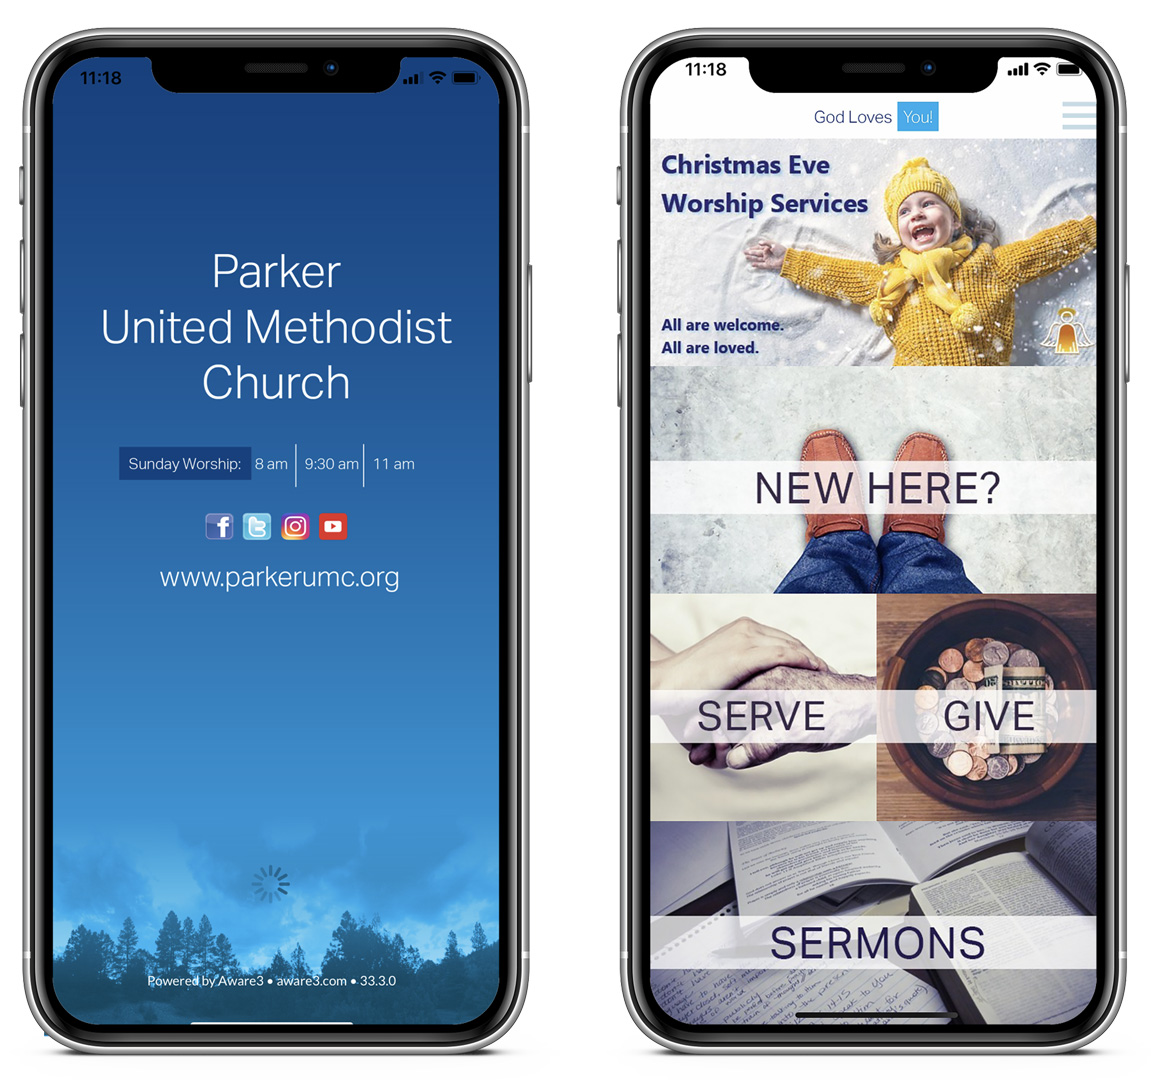 Splash screen and welcome screen on the Parker UMC app